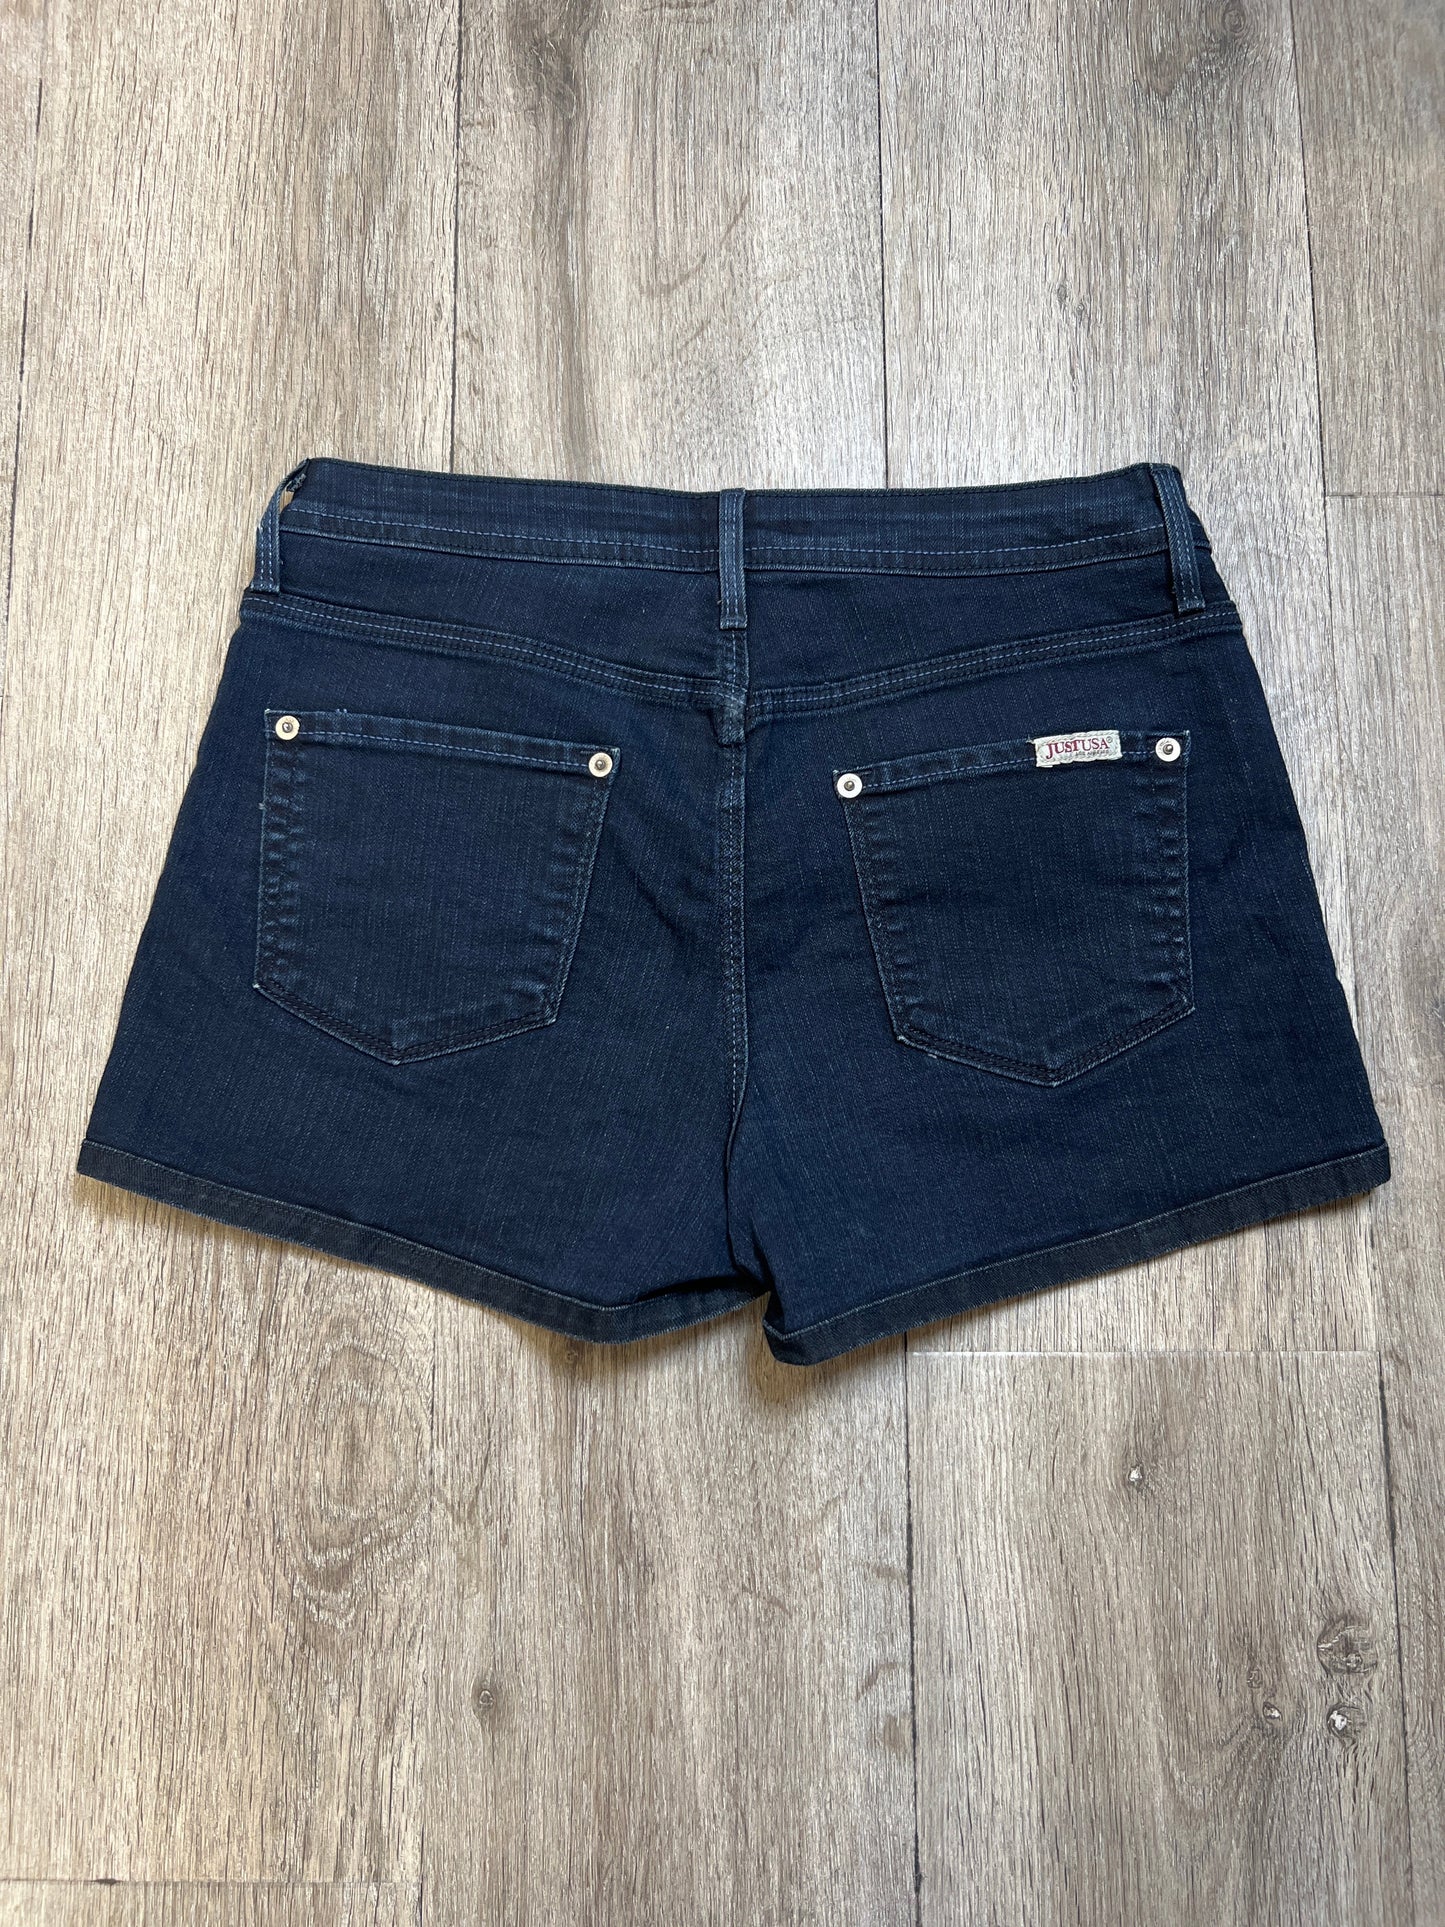 Shorts By Just USA  Size: S